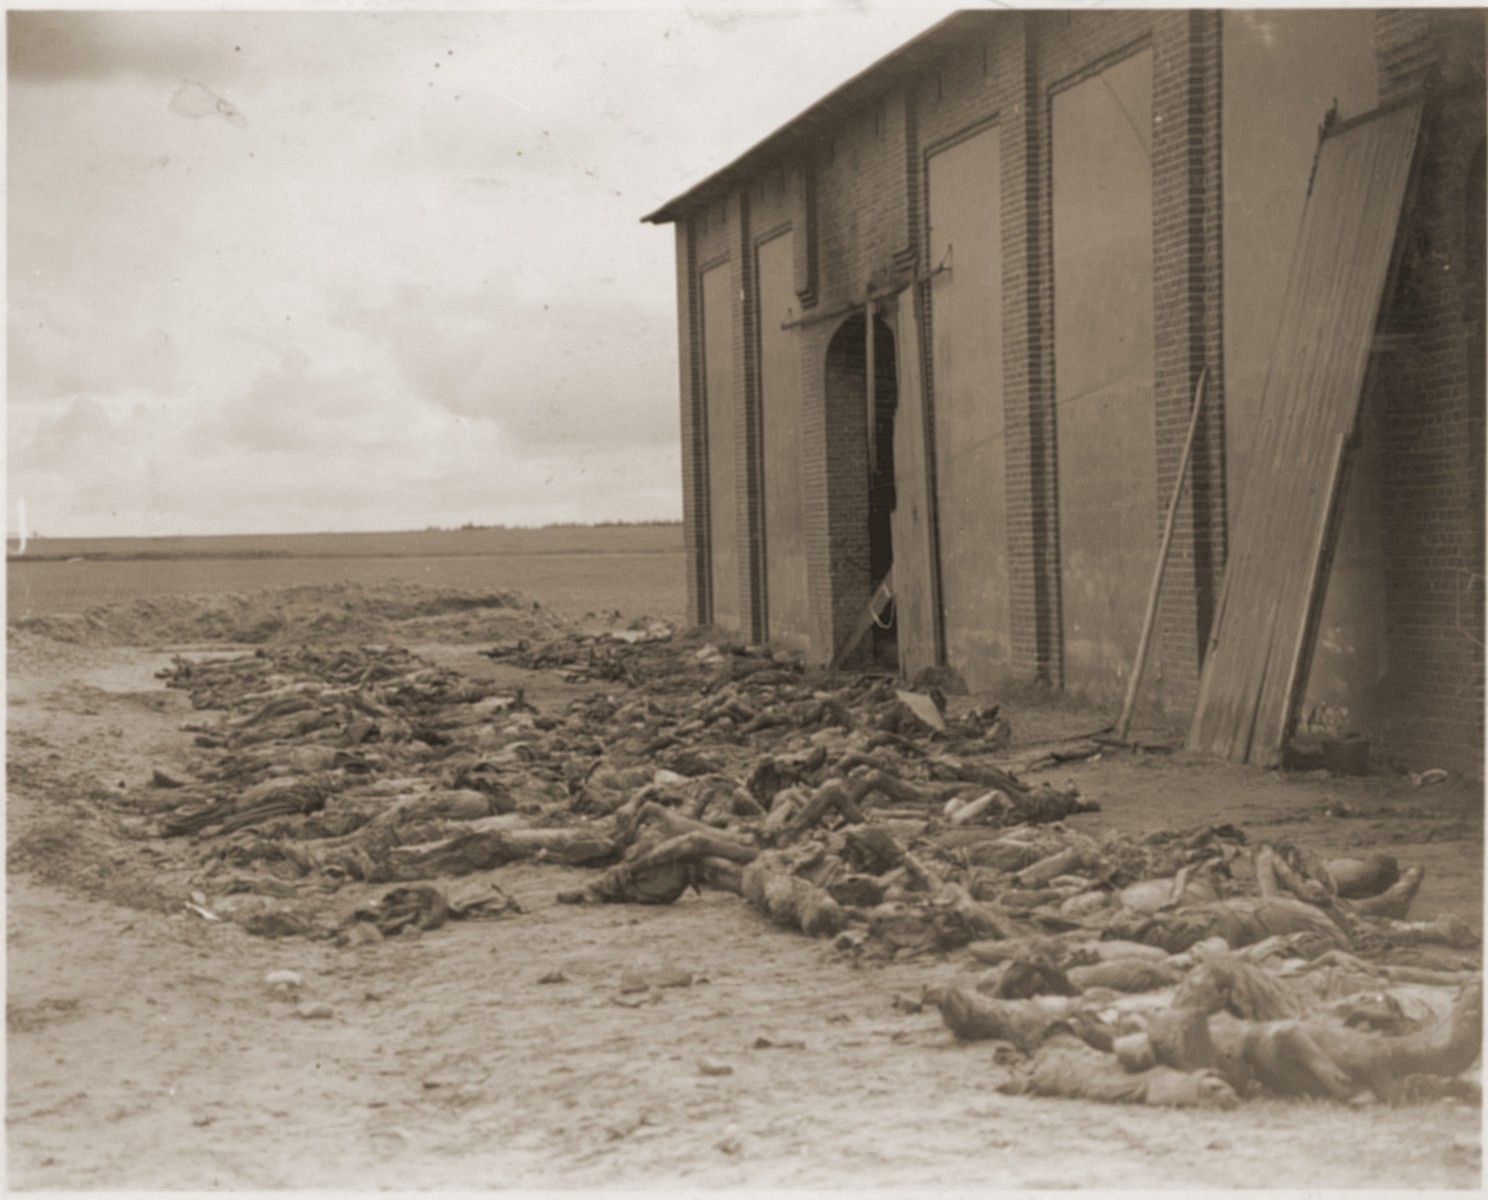 The bodies of concentration camp prisoners killed by the SS lie outside of a barn near Gardelegen.  

The original caption reads "German civilians bury victims of Nazi sadism.  The charred bodies of victims of Nazi brutality lie waiting for their reburial by civilians [from] nearby Gardelegen, Germany."